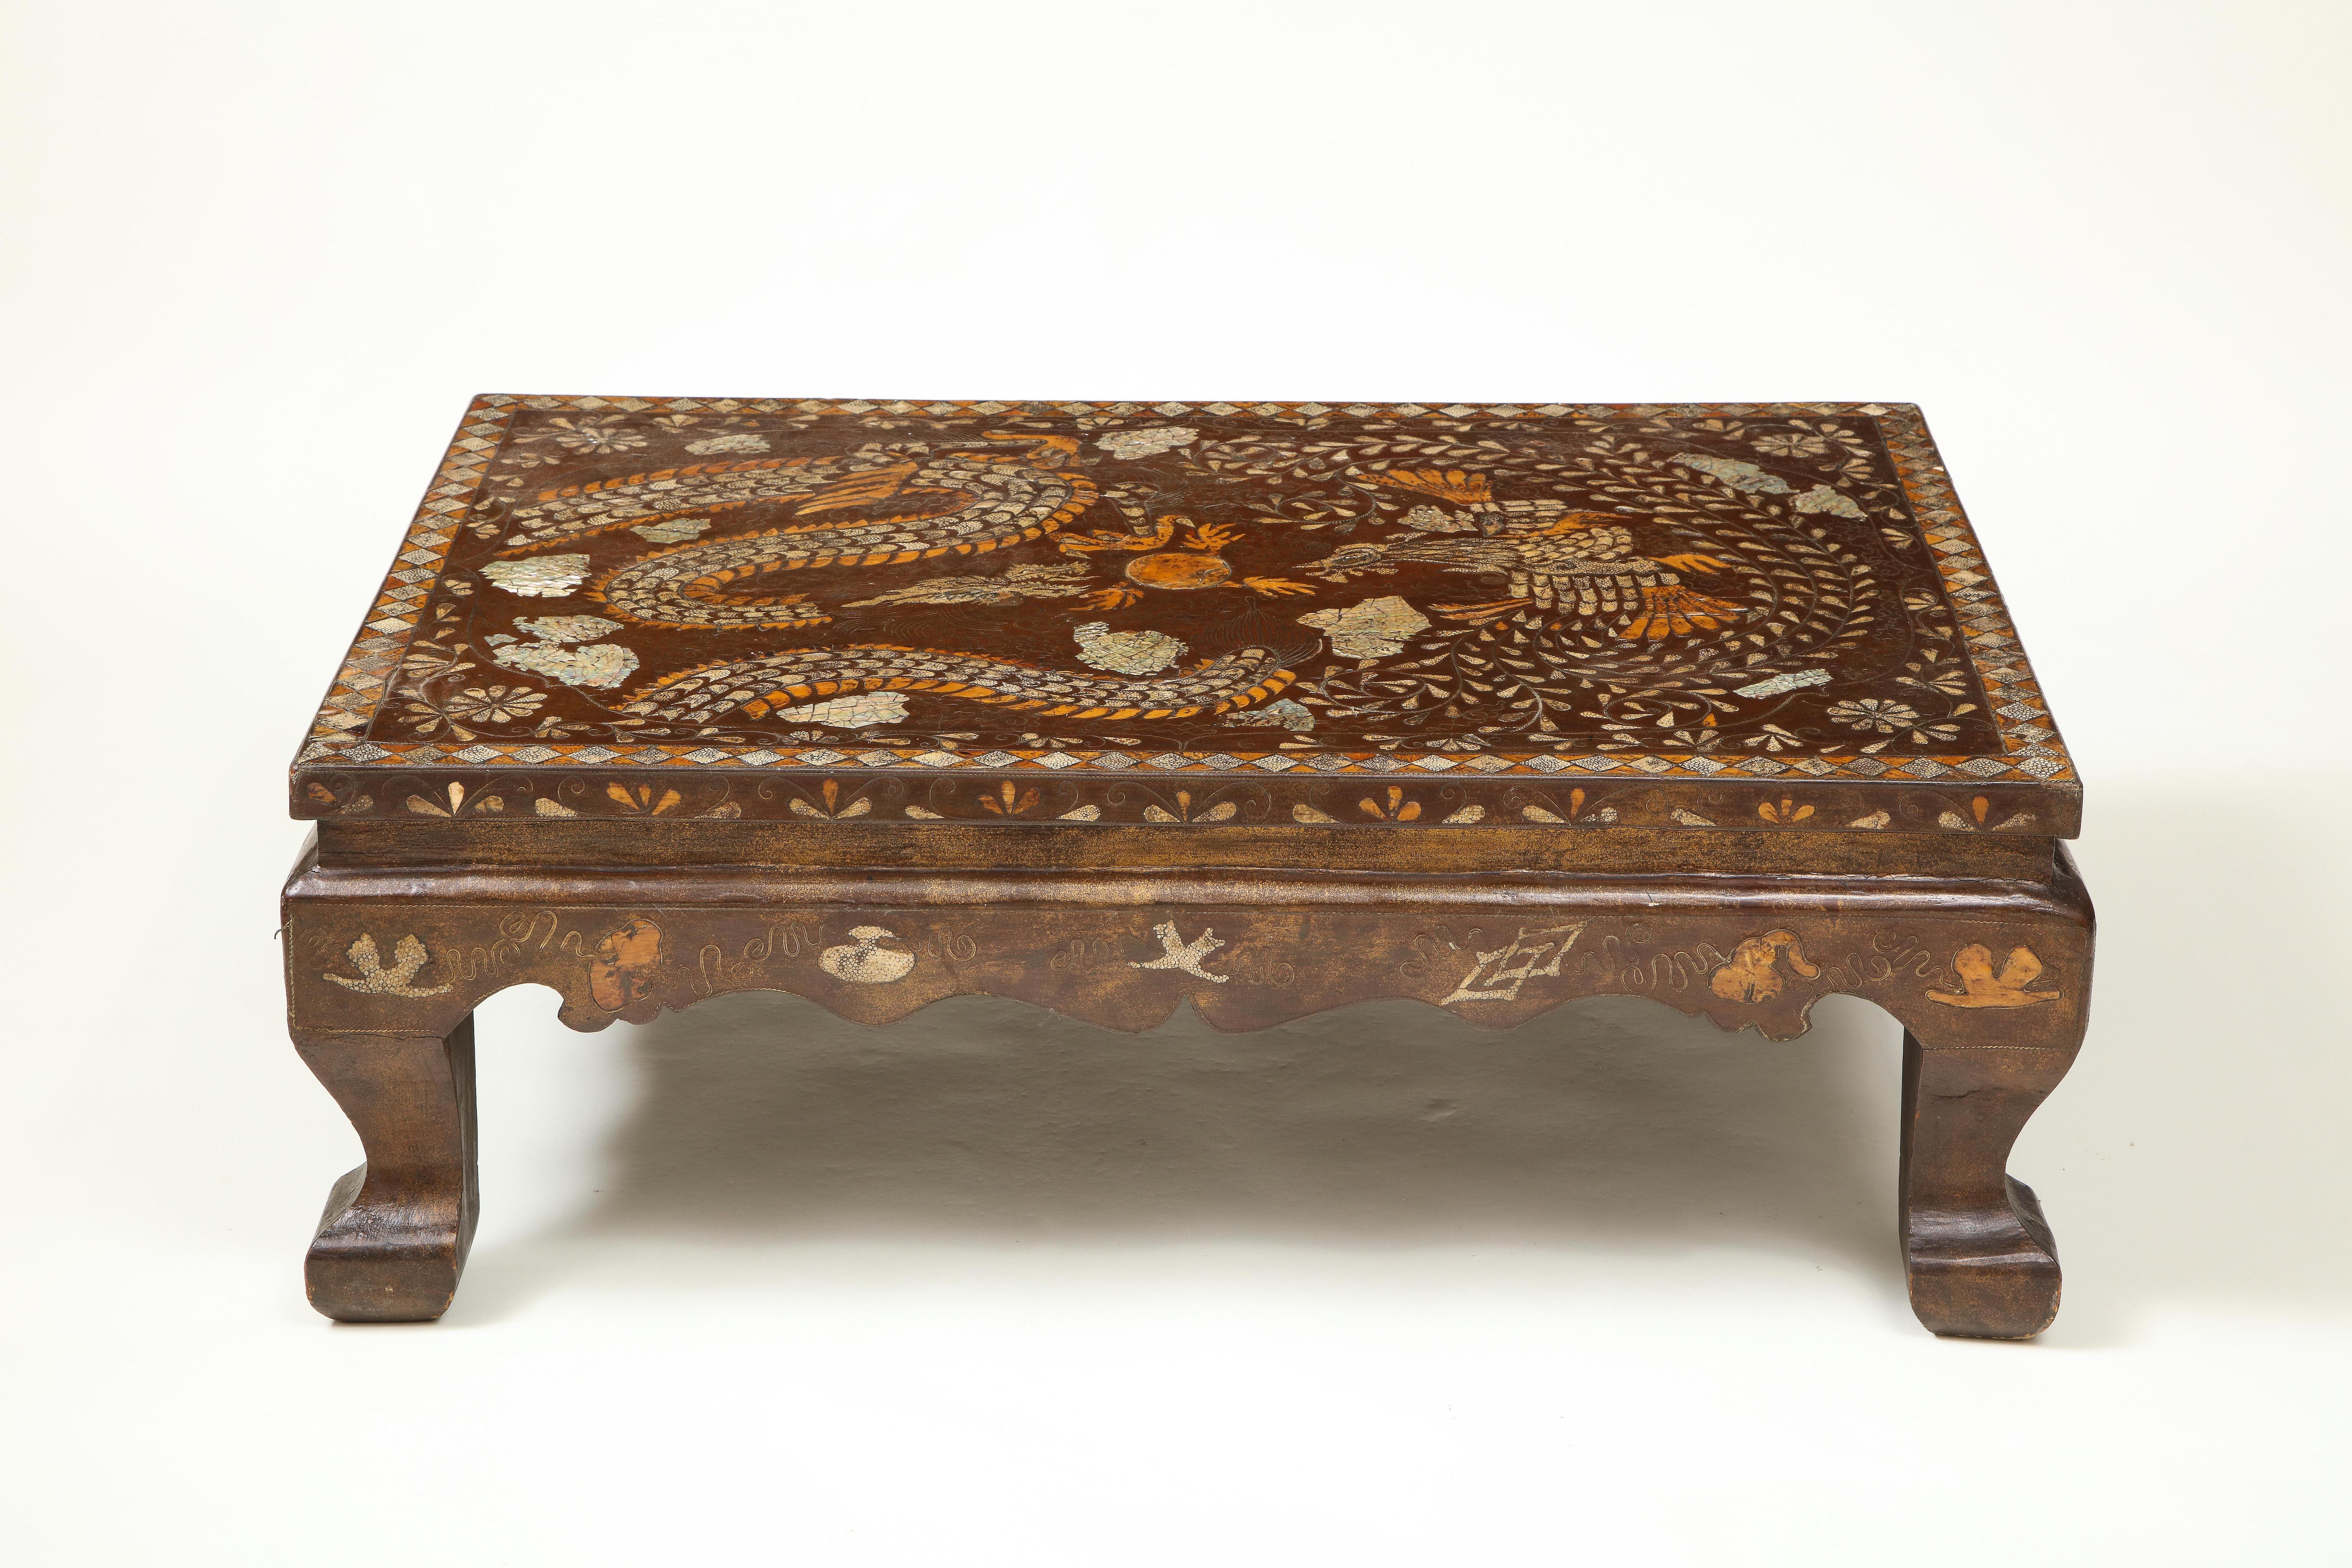 Abalone Brown Lacquer and Mother of Pearl Inlaid Low Table